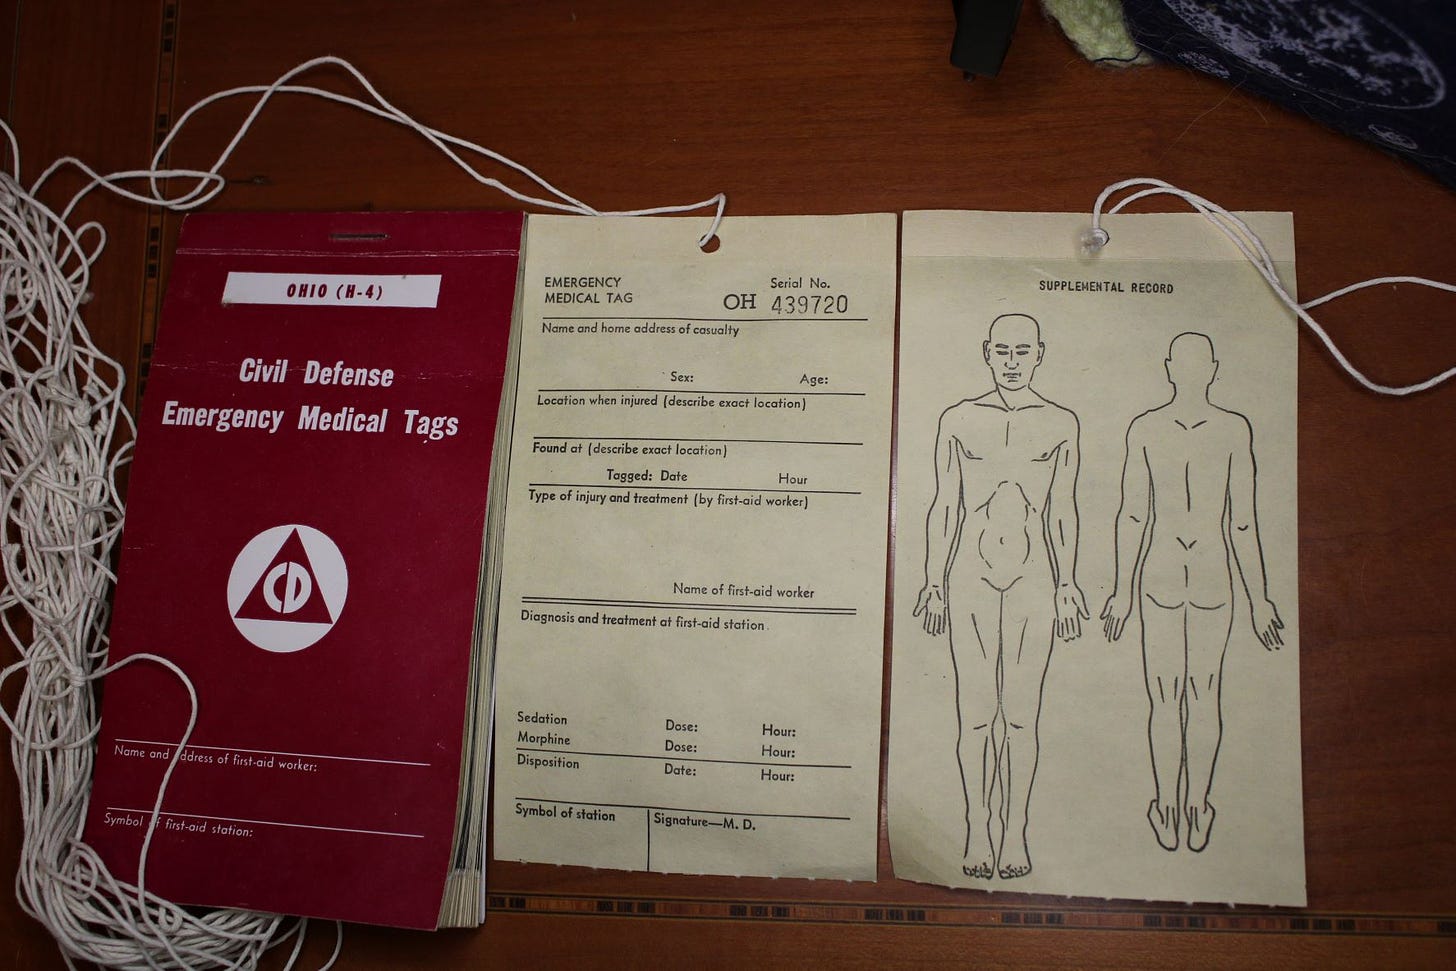 Civil Defense Medical Tags booklet, with both sides of a tag displayed next to it, This emergency tag allows first aid workers to tag bodies after a nuclear blast, identifying treatable and untreatable injuries.